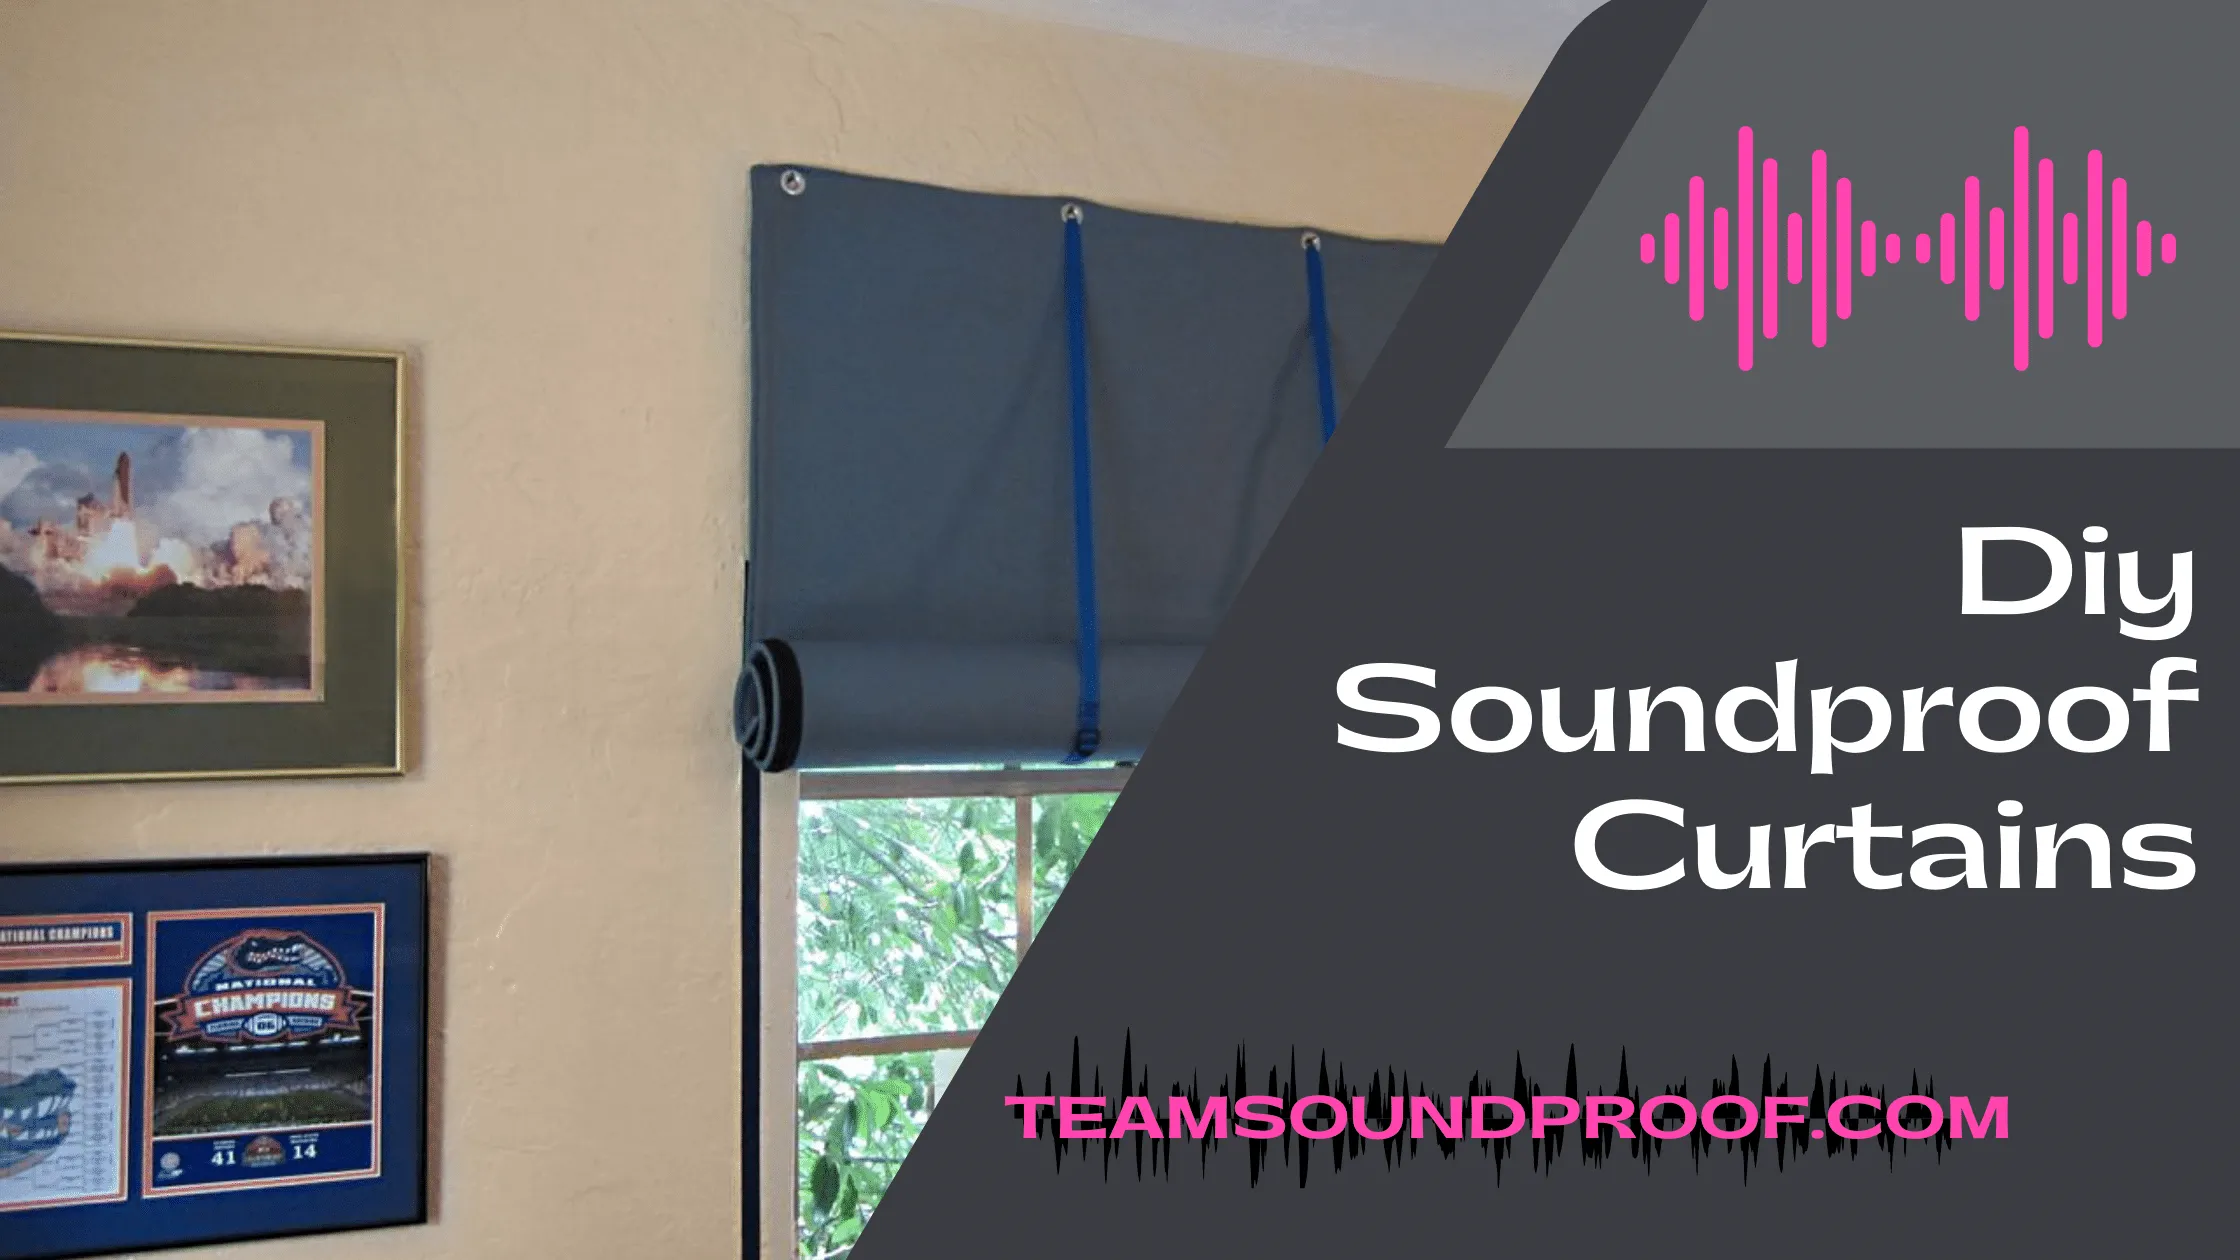 Diy Soundproof Curtains - Complete Guide